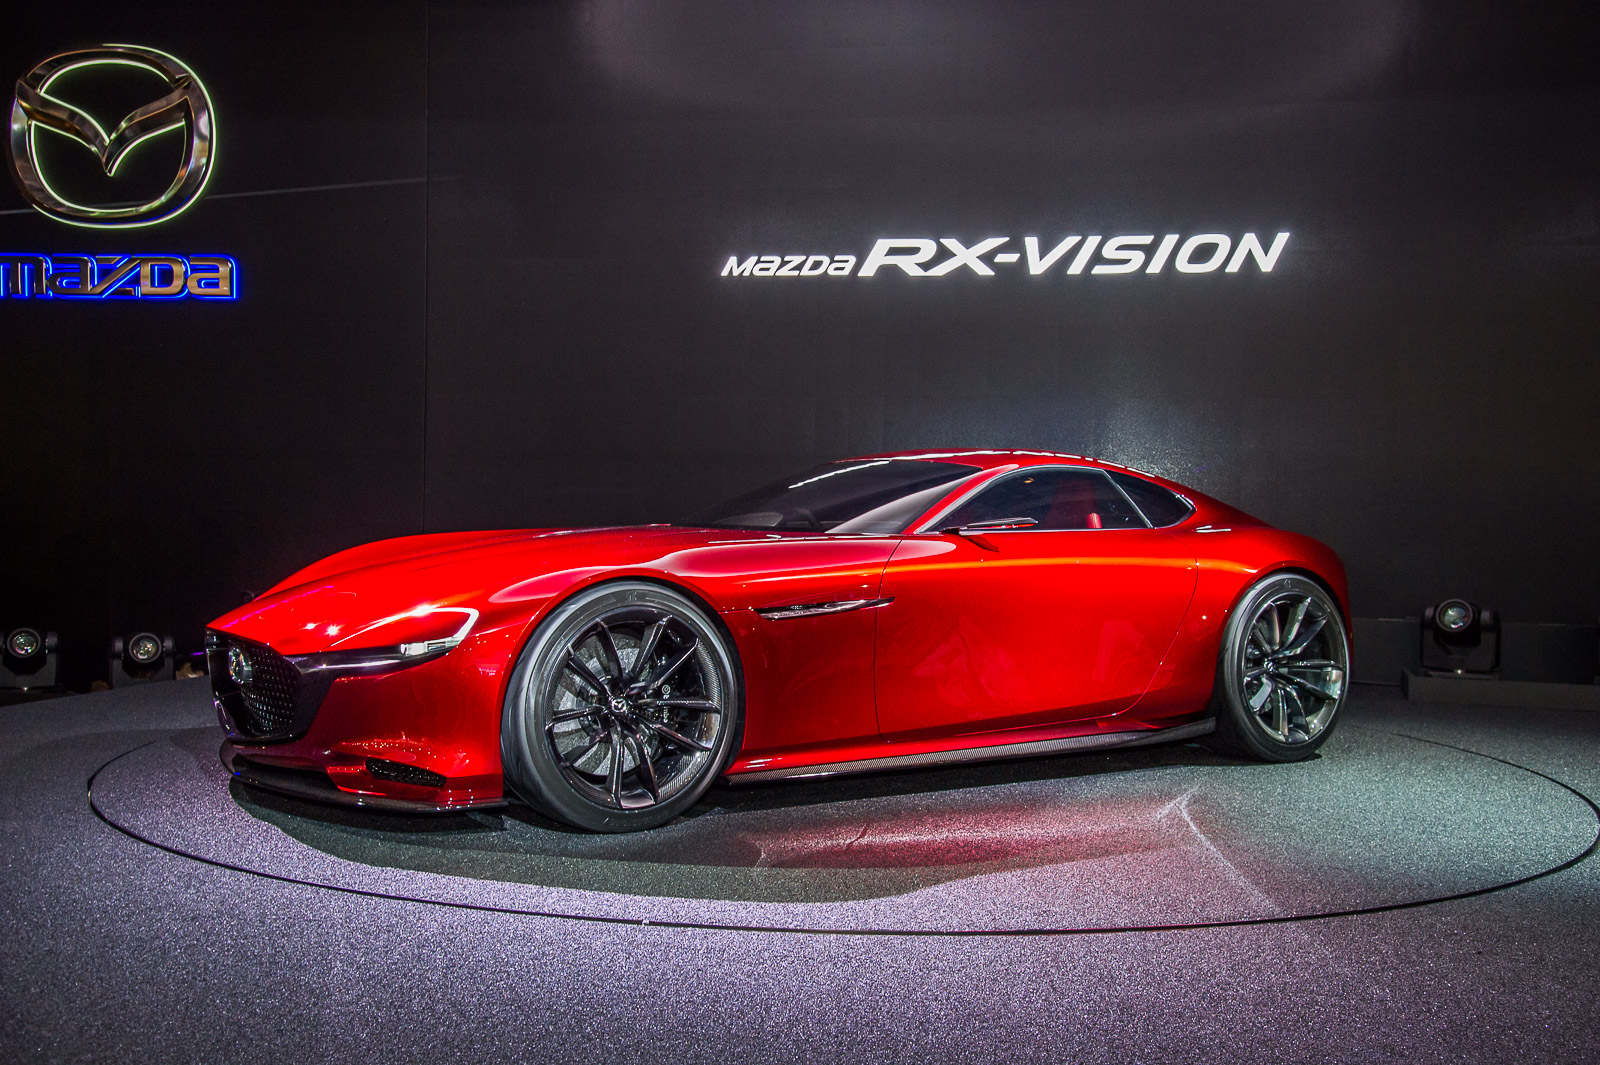 Mazda RX-Vision rotary-engined sports car concept revealed | Autocar